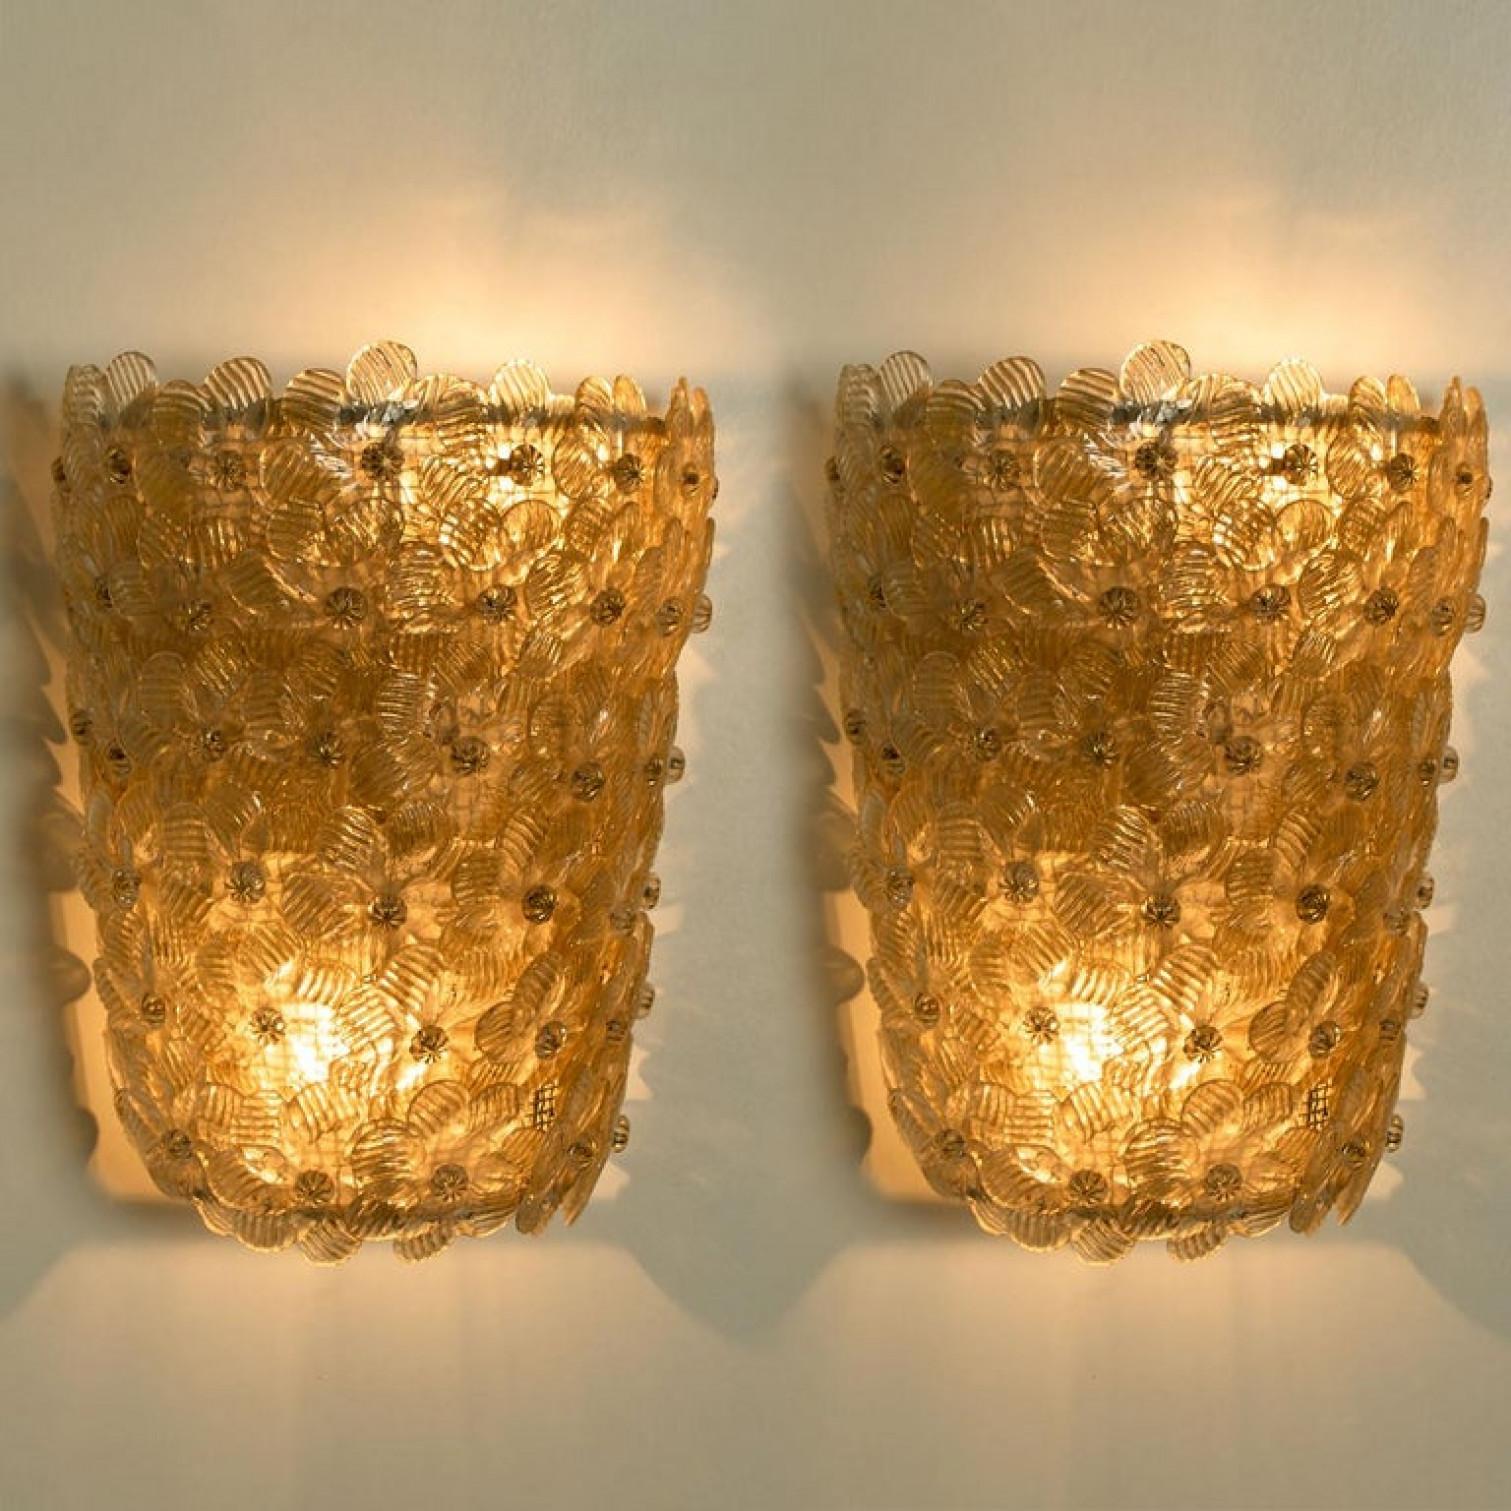 Pair of Flower Light Fixtures by Barovier & Toso, Murano, 1990s In Good Condition For Sale In Rijssen, NL